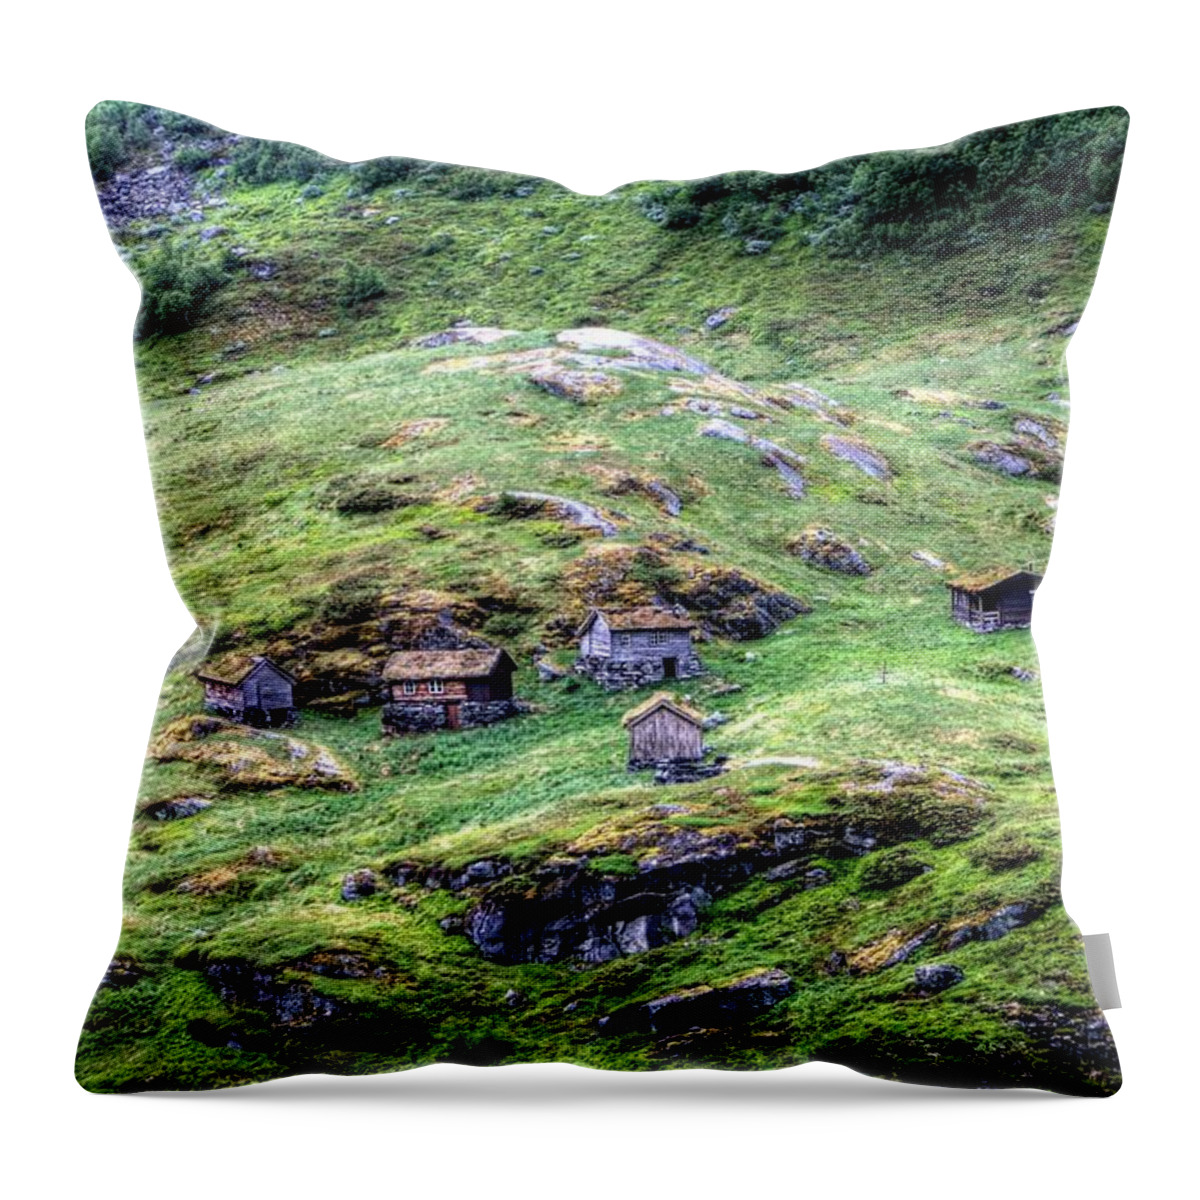 Norway Throw Pillow featuring the photograph Norway #118 by Paul James Bannerman